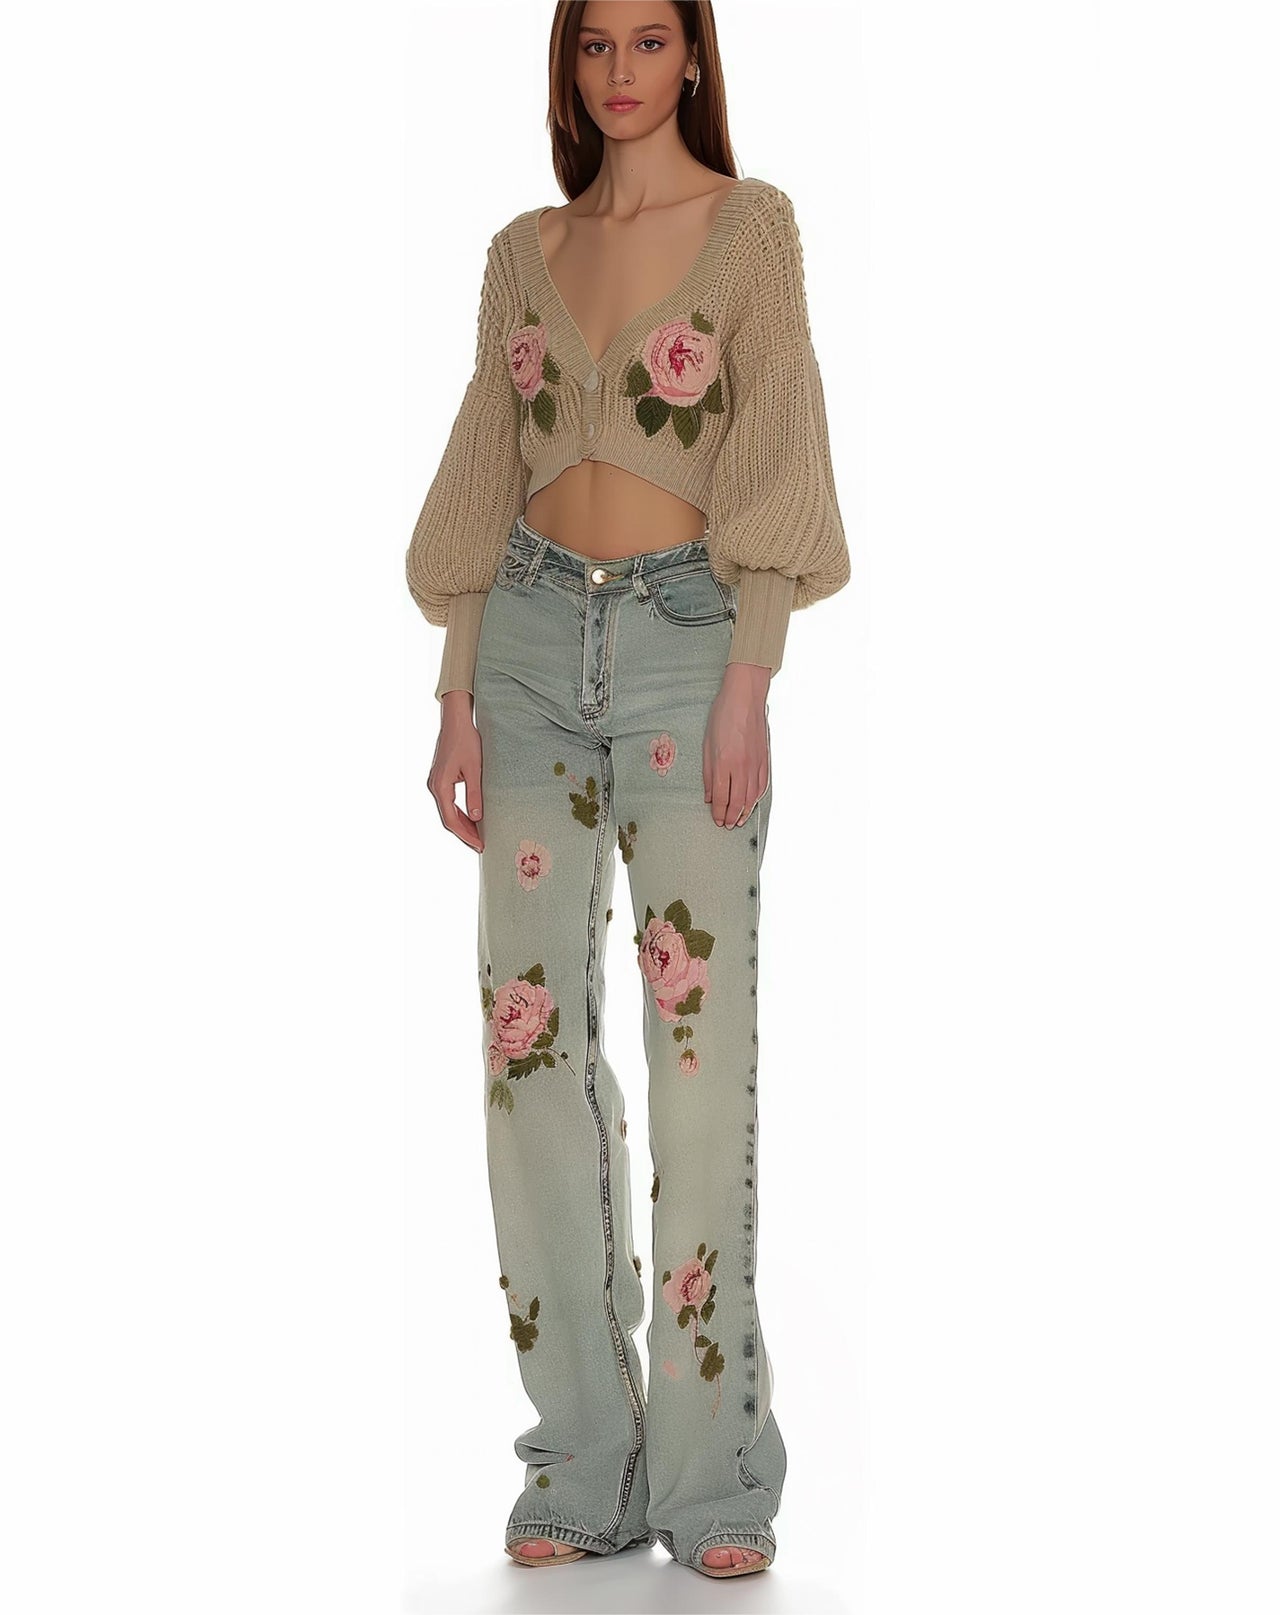 Ava Floral Knit Cropped Cardigan - Beige